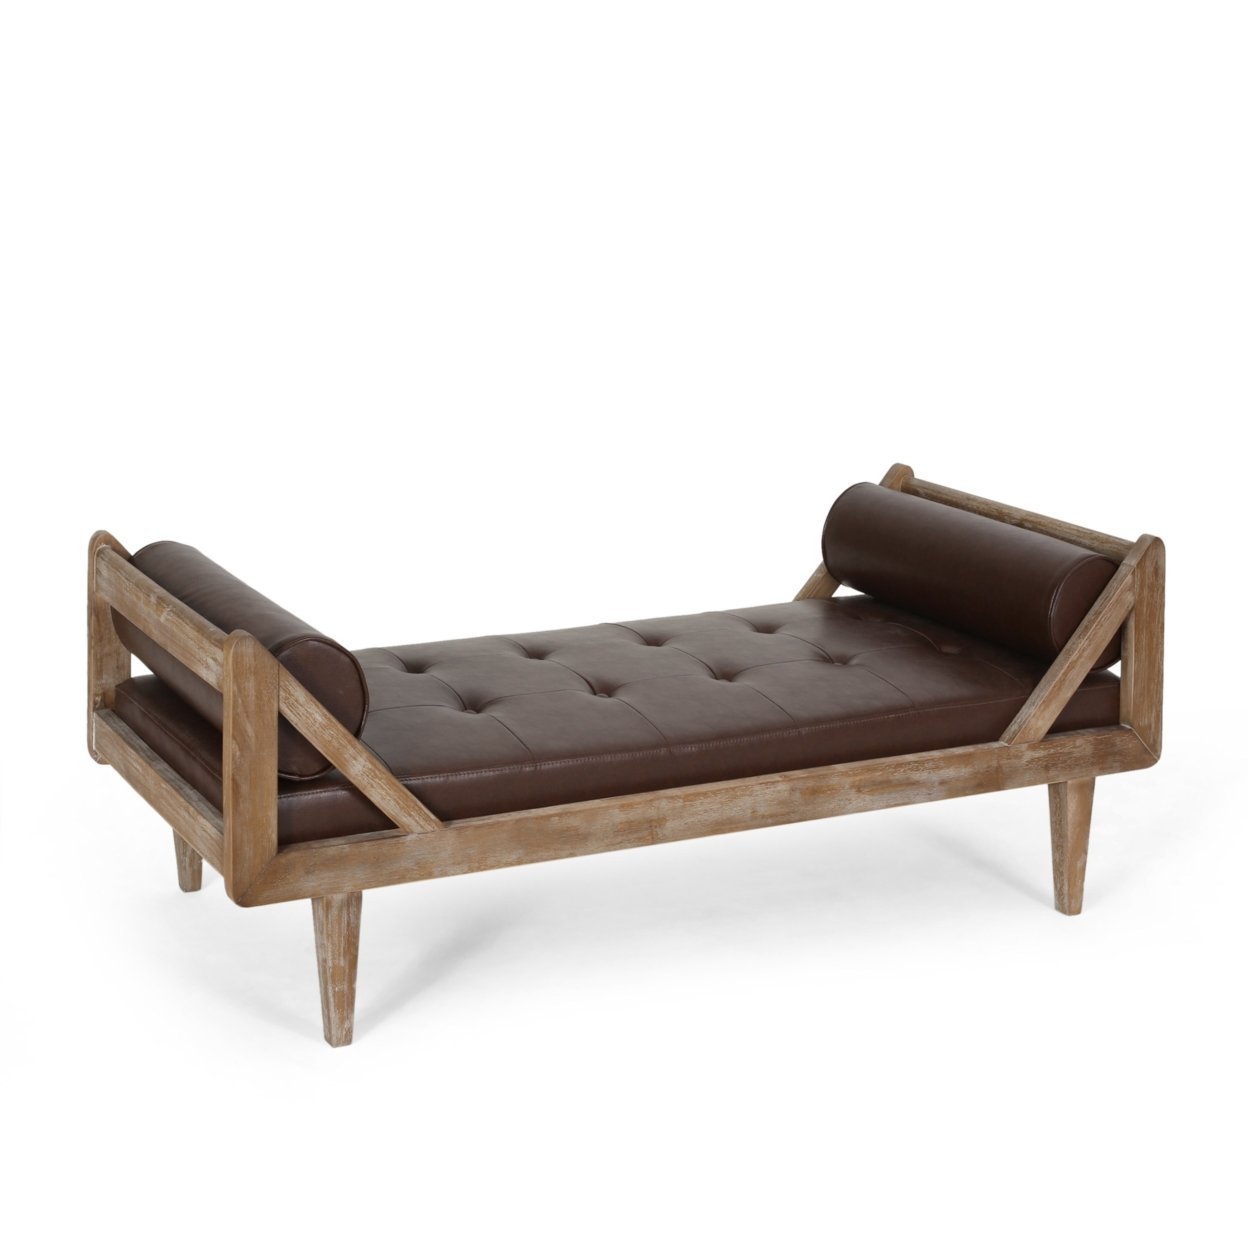 Huller Rustic Tufted Double End Chaise Lounge With Bolster Pillows - Dark Beige